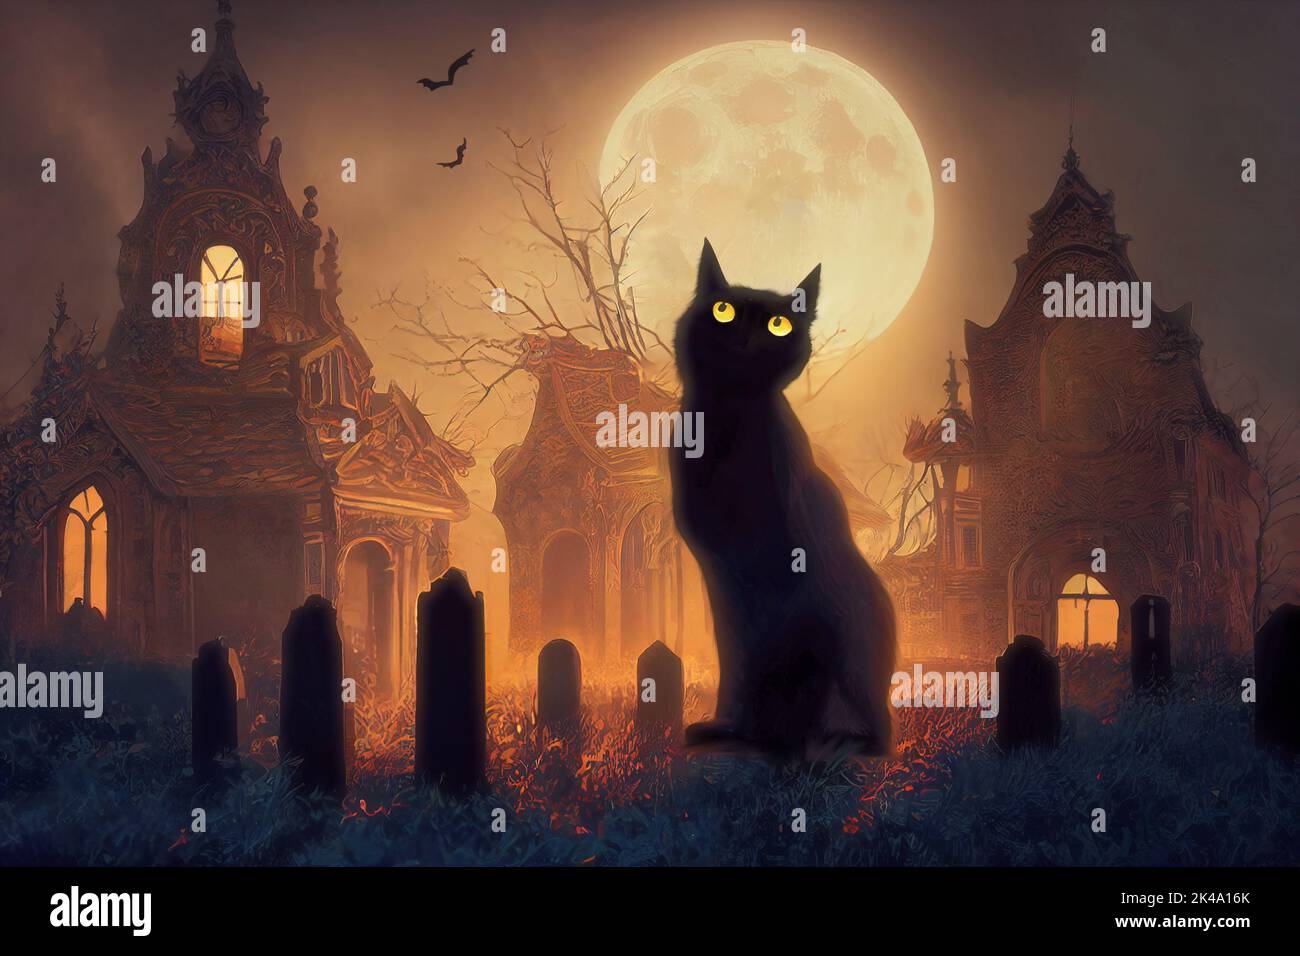 Black cat silhouette against full moon, spooky cemetery and ruins at Halloween night. Digital illustration Stock Photo